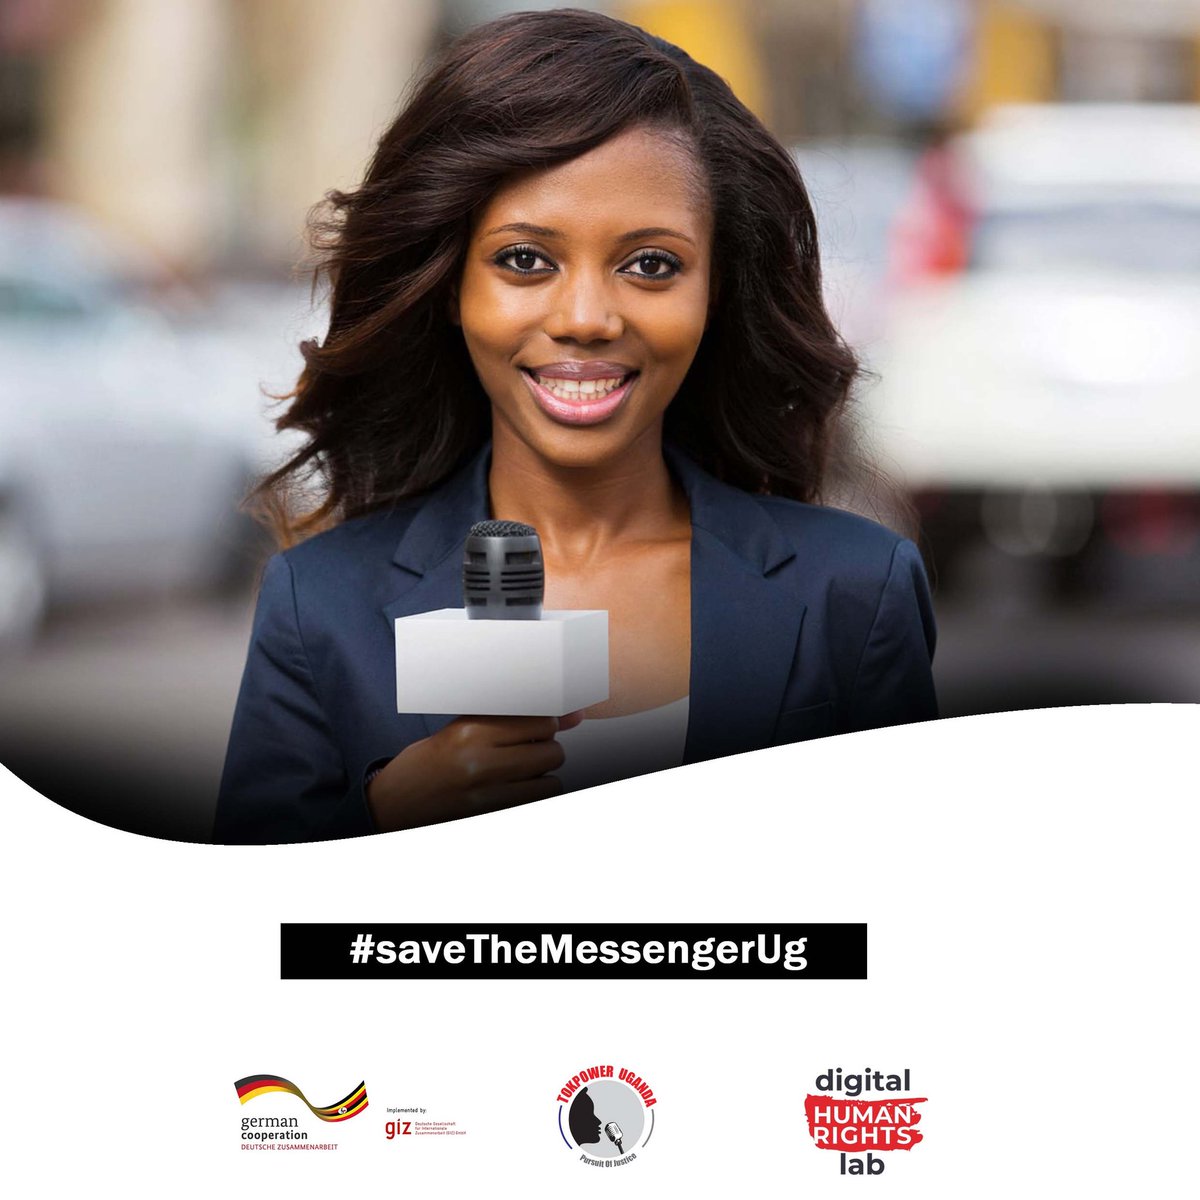 Female #journalists carry the double burden of  #GBV online & potential threats related to political reporting. These threats have led women journos to withdraw from public discourse — leaving it to men.
How can they be better protected?
#SaveTheMessengerUg
#GenderDigitalDivide